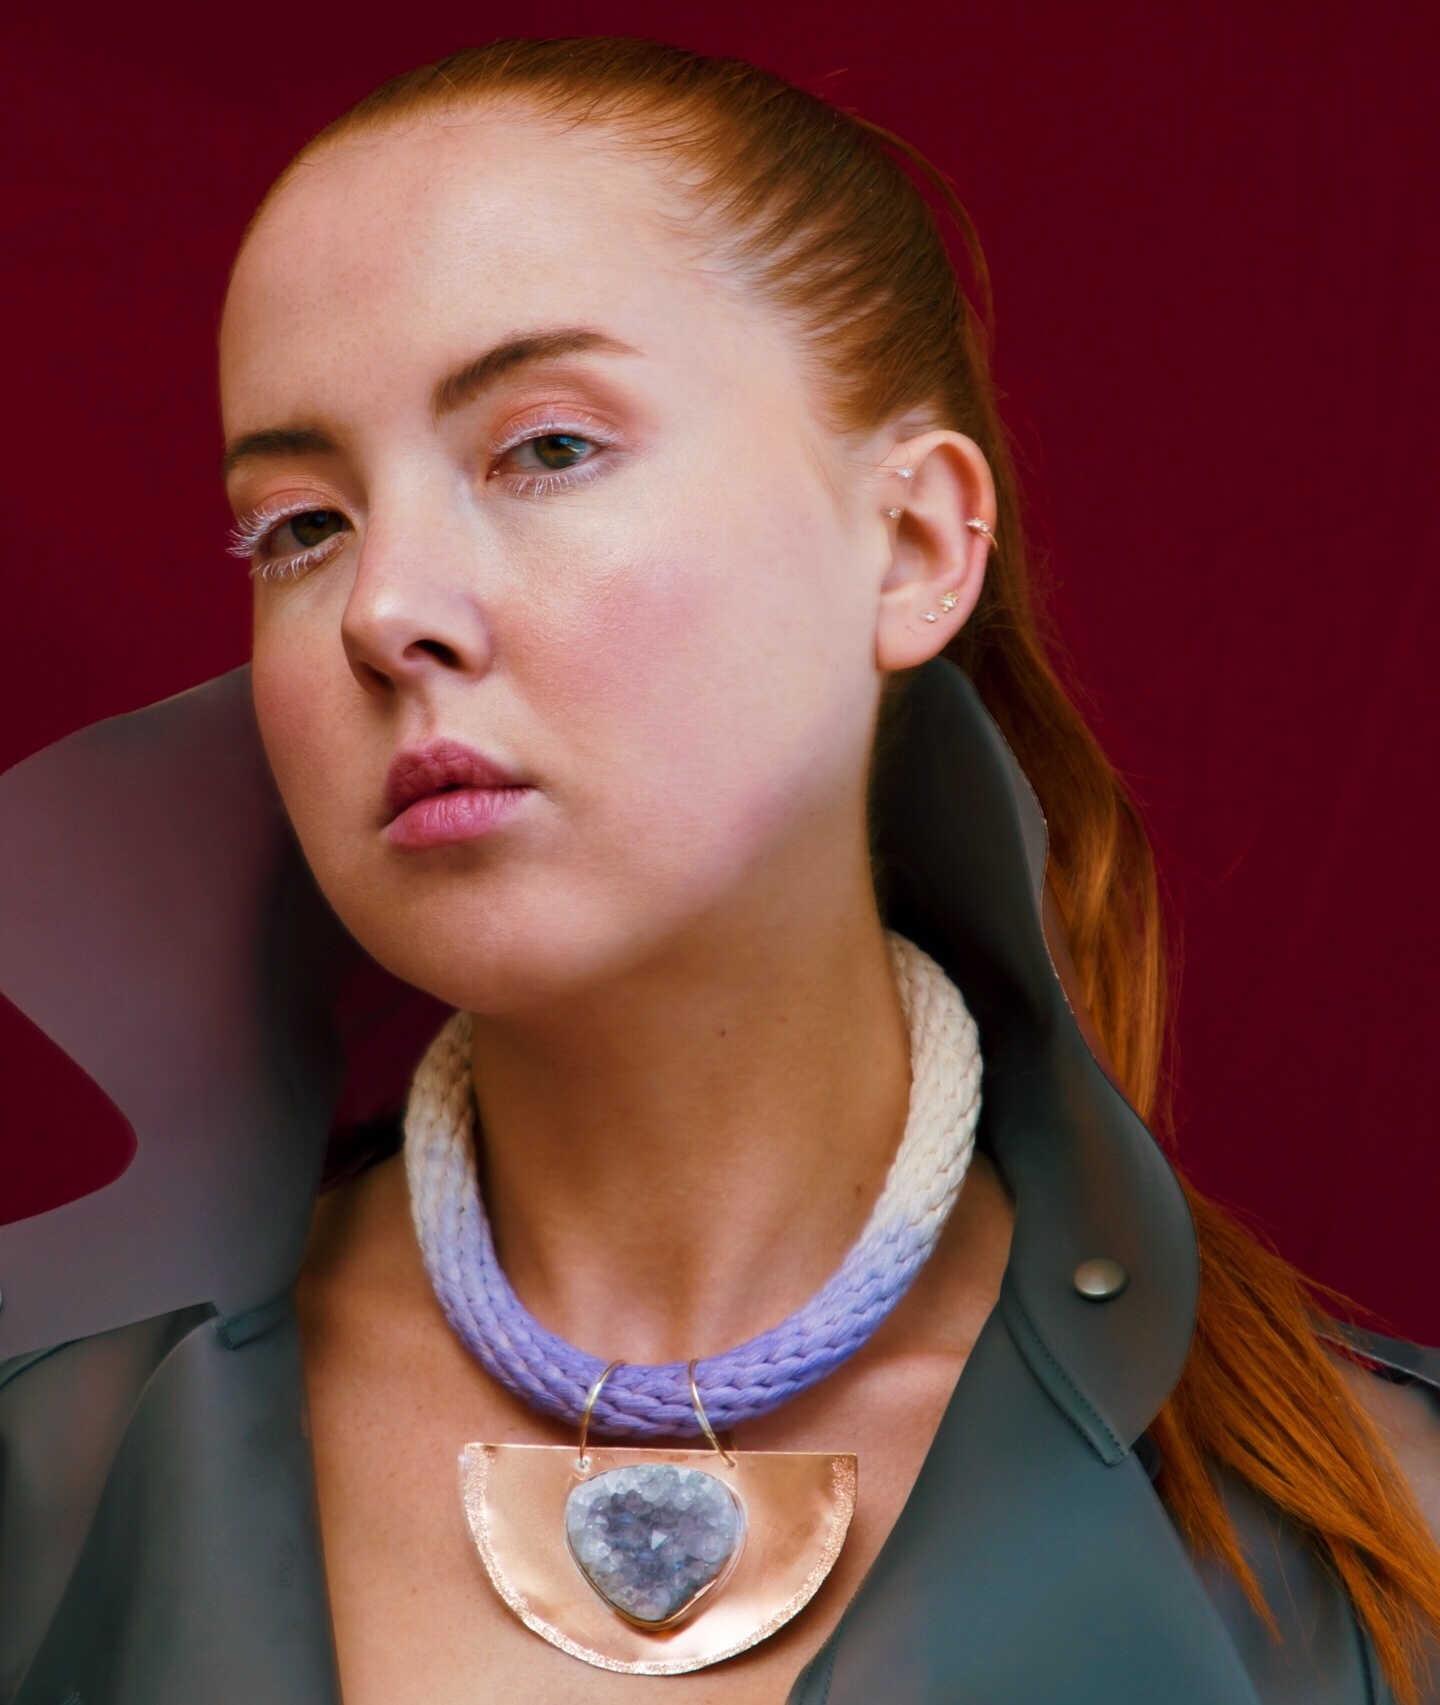 Statement Necklace: Jewelry that makes Anna feel strongest